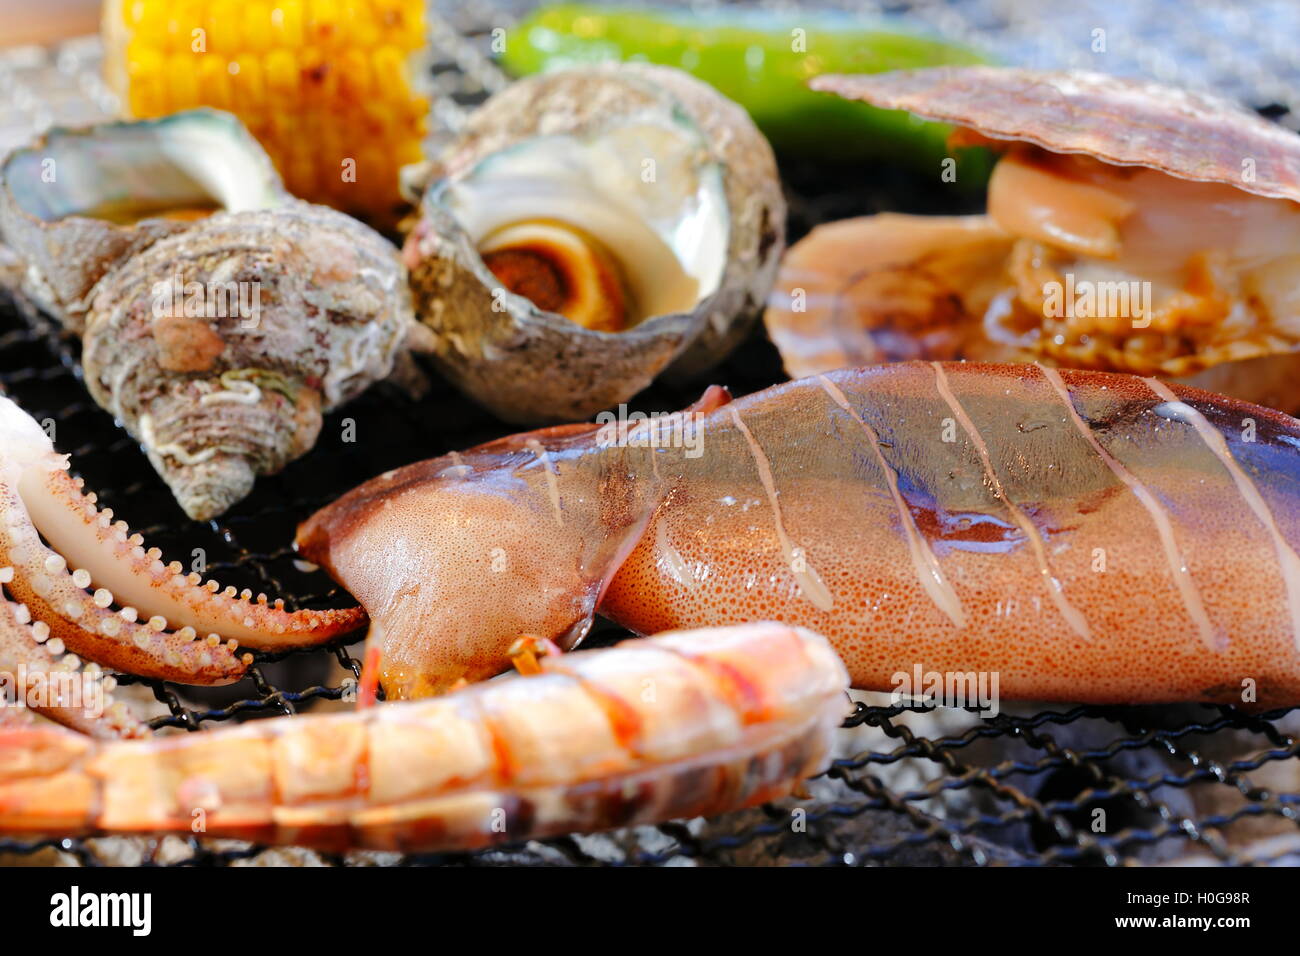 Grilling abalone, squid, shrimp, clams and corn with hot charcoal Stock Photo